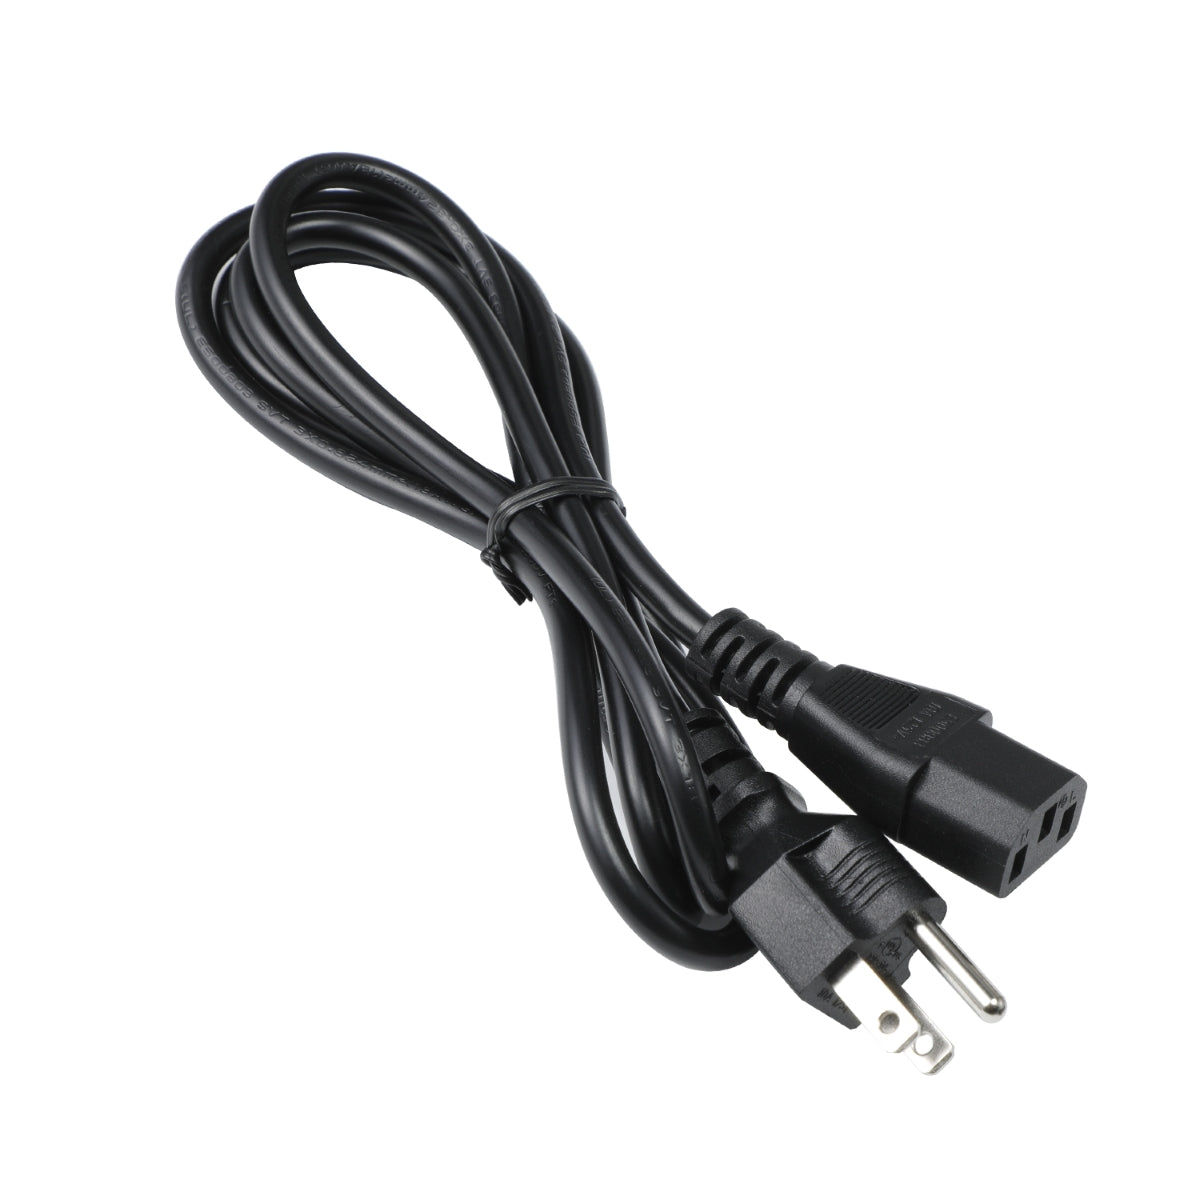 Power Cord for Acer XF270H Monitor.